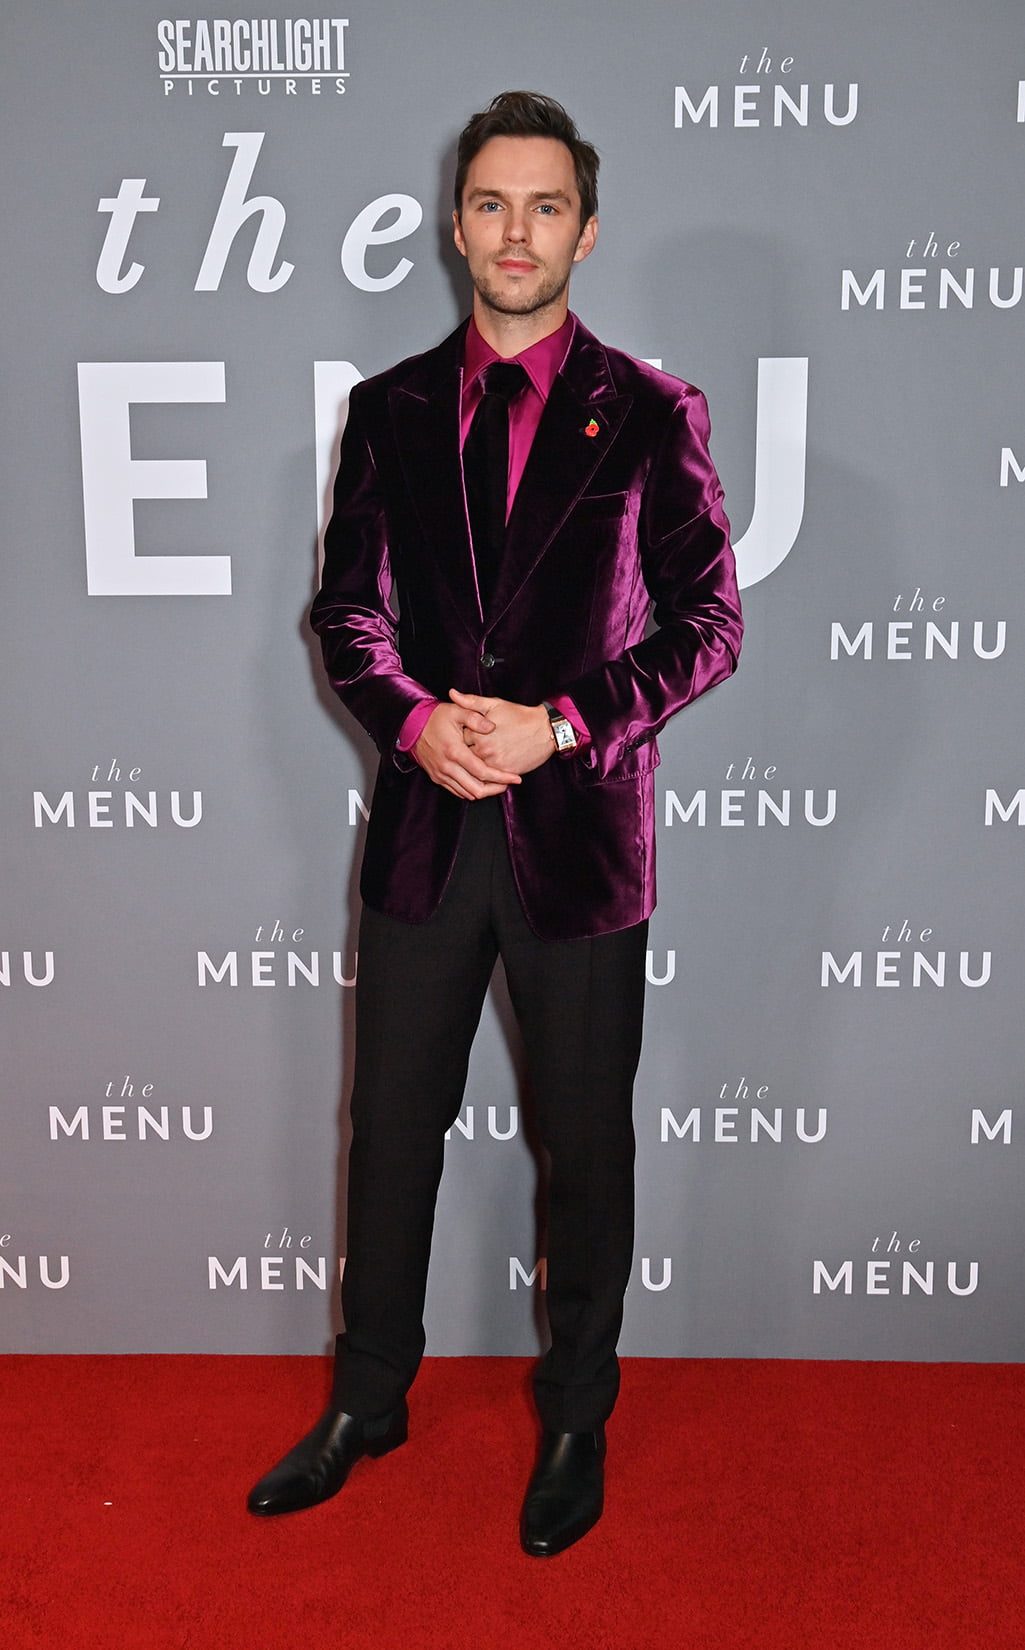 Nicholas Hoult at the World Premiere of The Menu